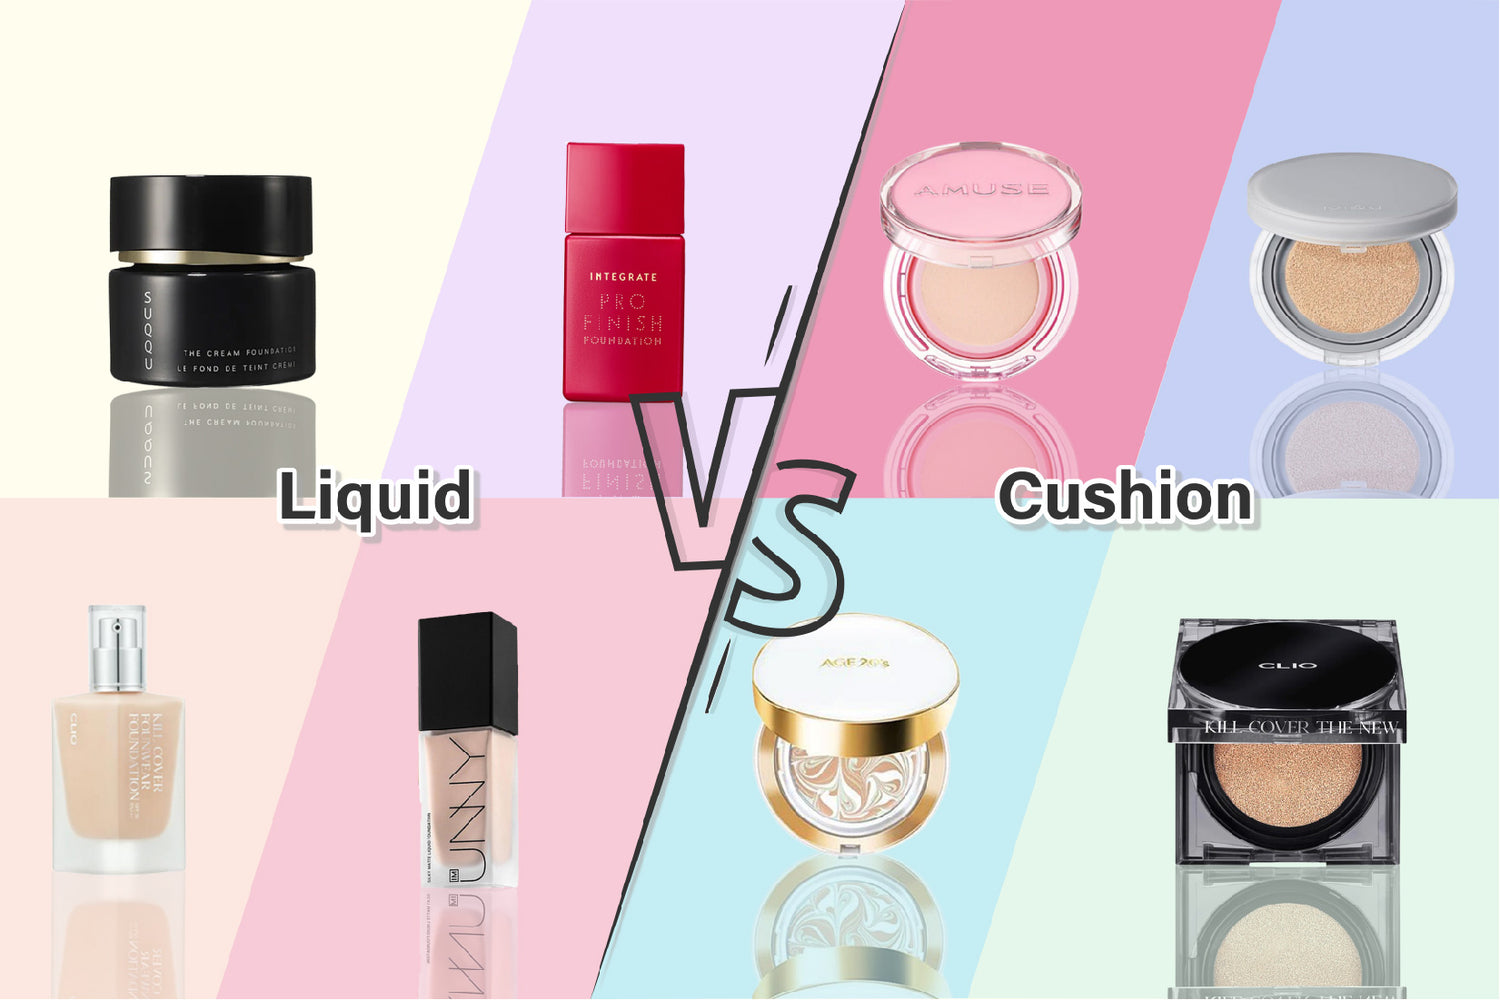 How to choose the right foundation - Liquid vs Cushion?